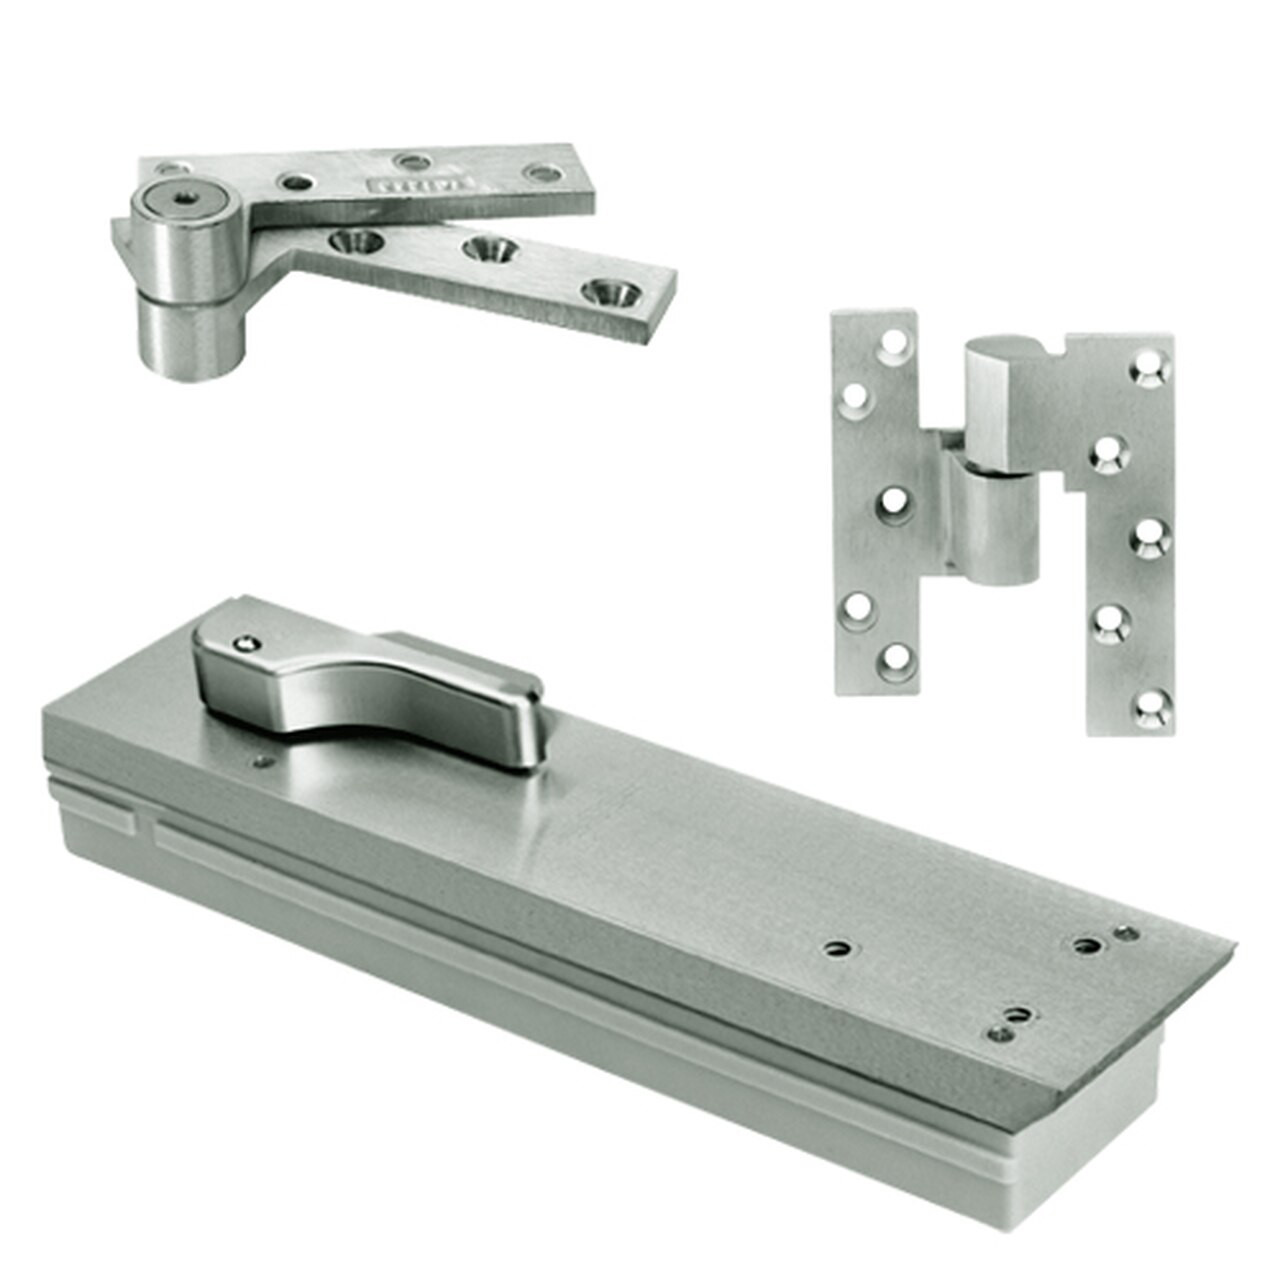 FQ5103NBC-LFP-LCC-RH-619 Rixson Q51 Series Fire Rated 3/4" Offset Hung Shallow Depth Floor Closers in Satin Nickel Finish